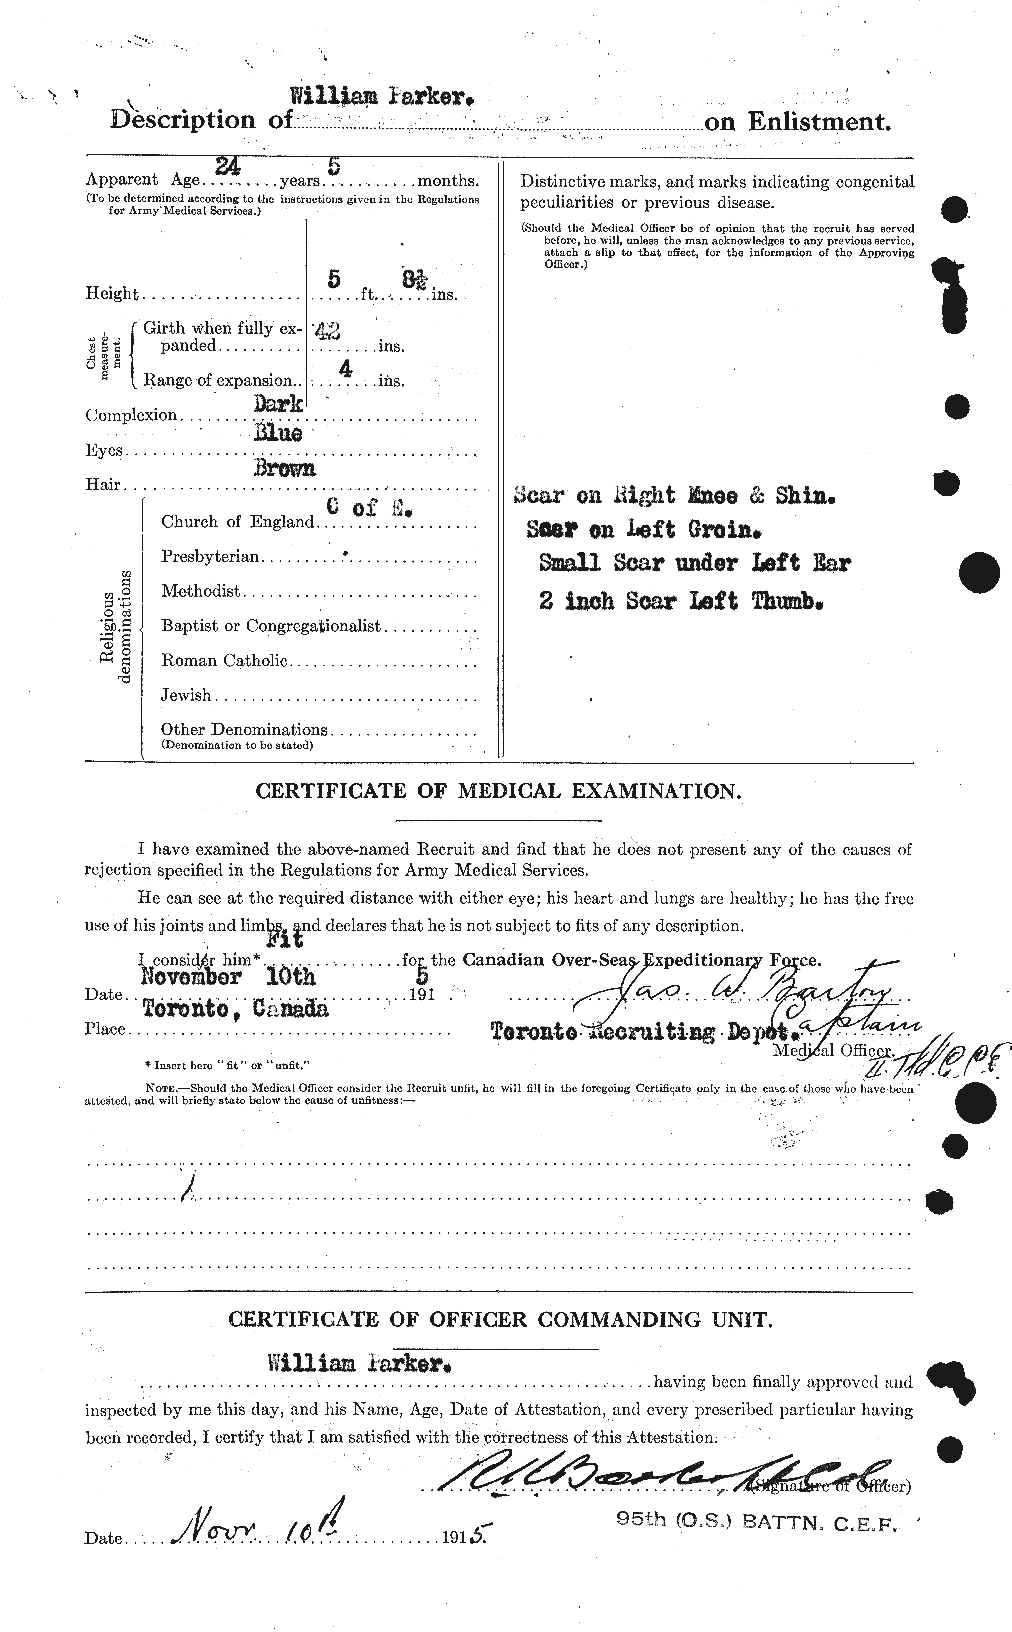 Personnel Records of the First World War - CEF 565717b